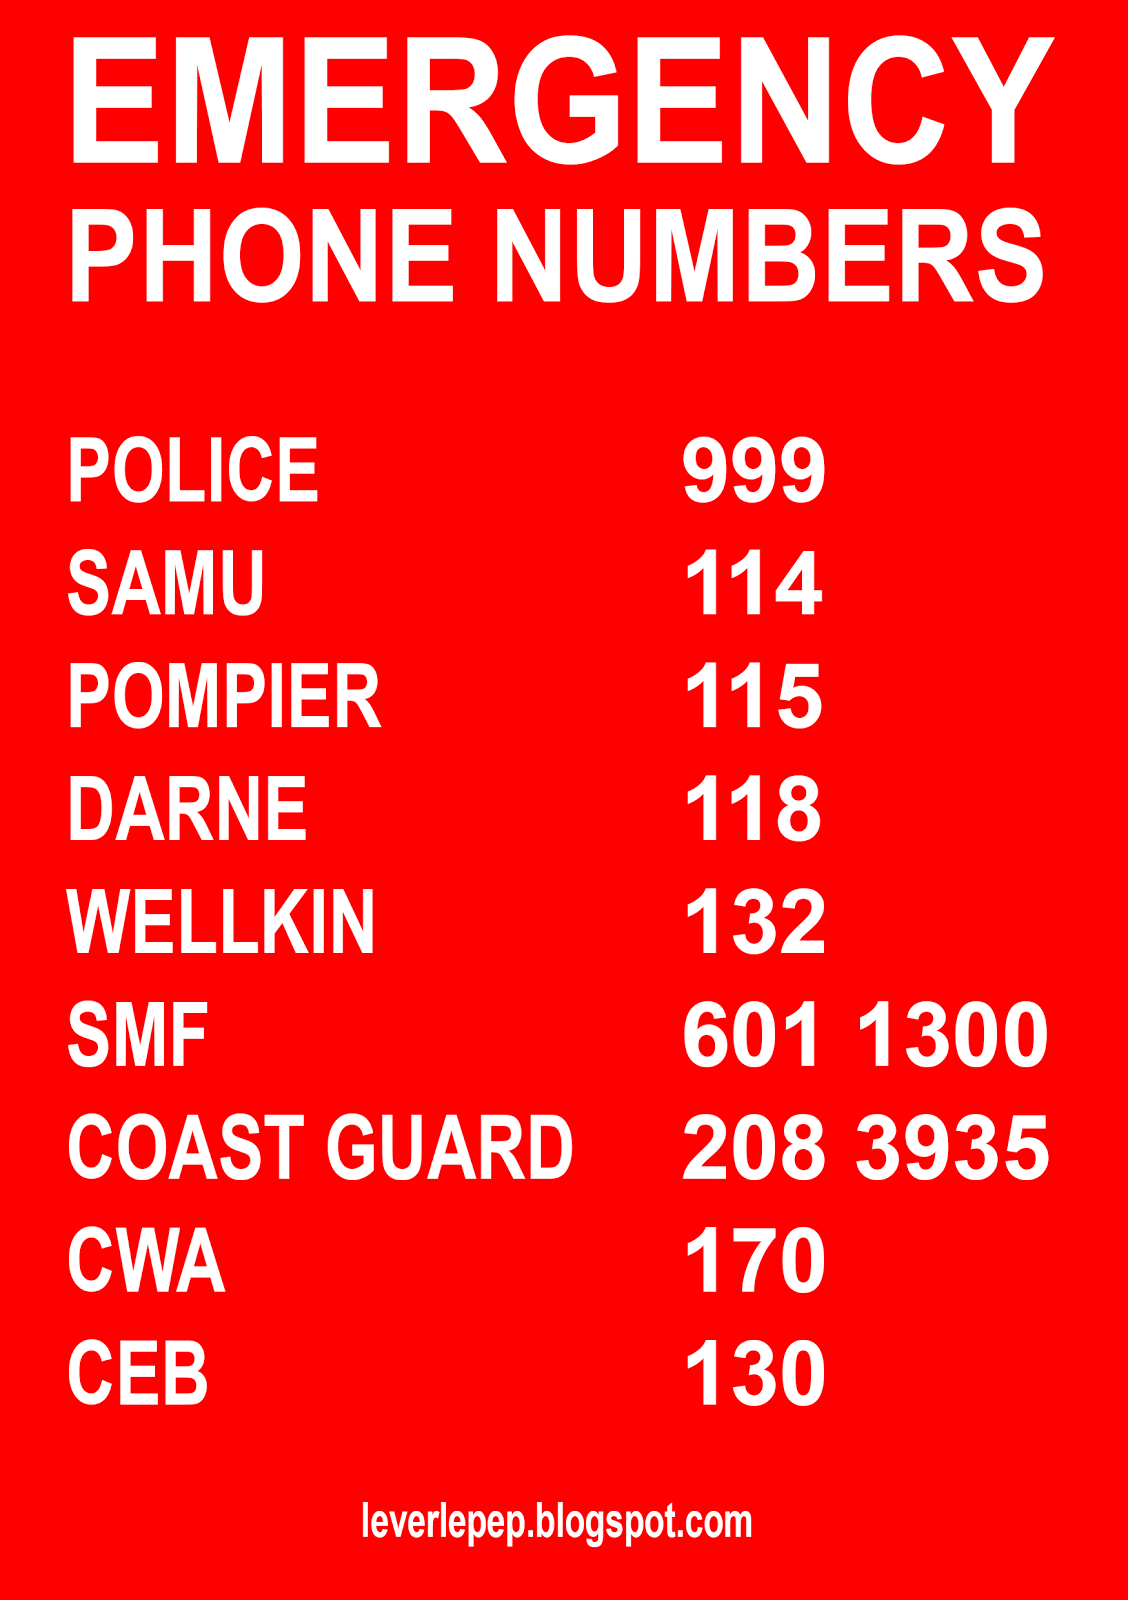 emergency-phone-numbers-poster-for-mauritius